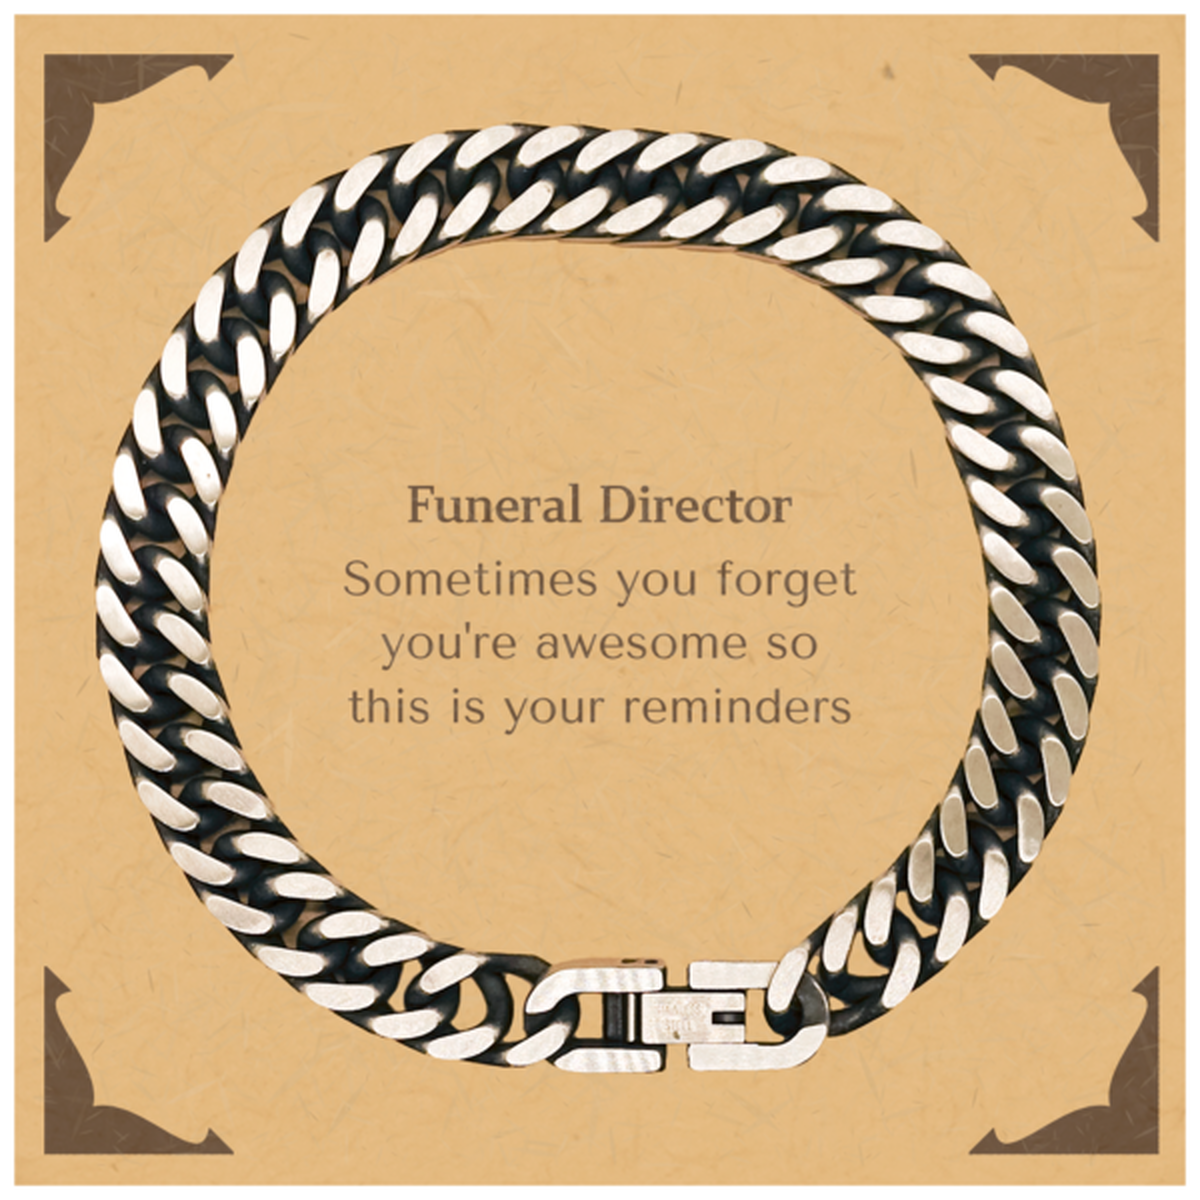 Sentimental Funeral Director Cuban Link Chain Bracelet, Funeral Director Sometimes you forget you're awesome so this is your reminders, Graduation Christmas Birthday Gifts for Funeral Director, Men, Women, Coworkers